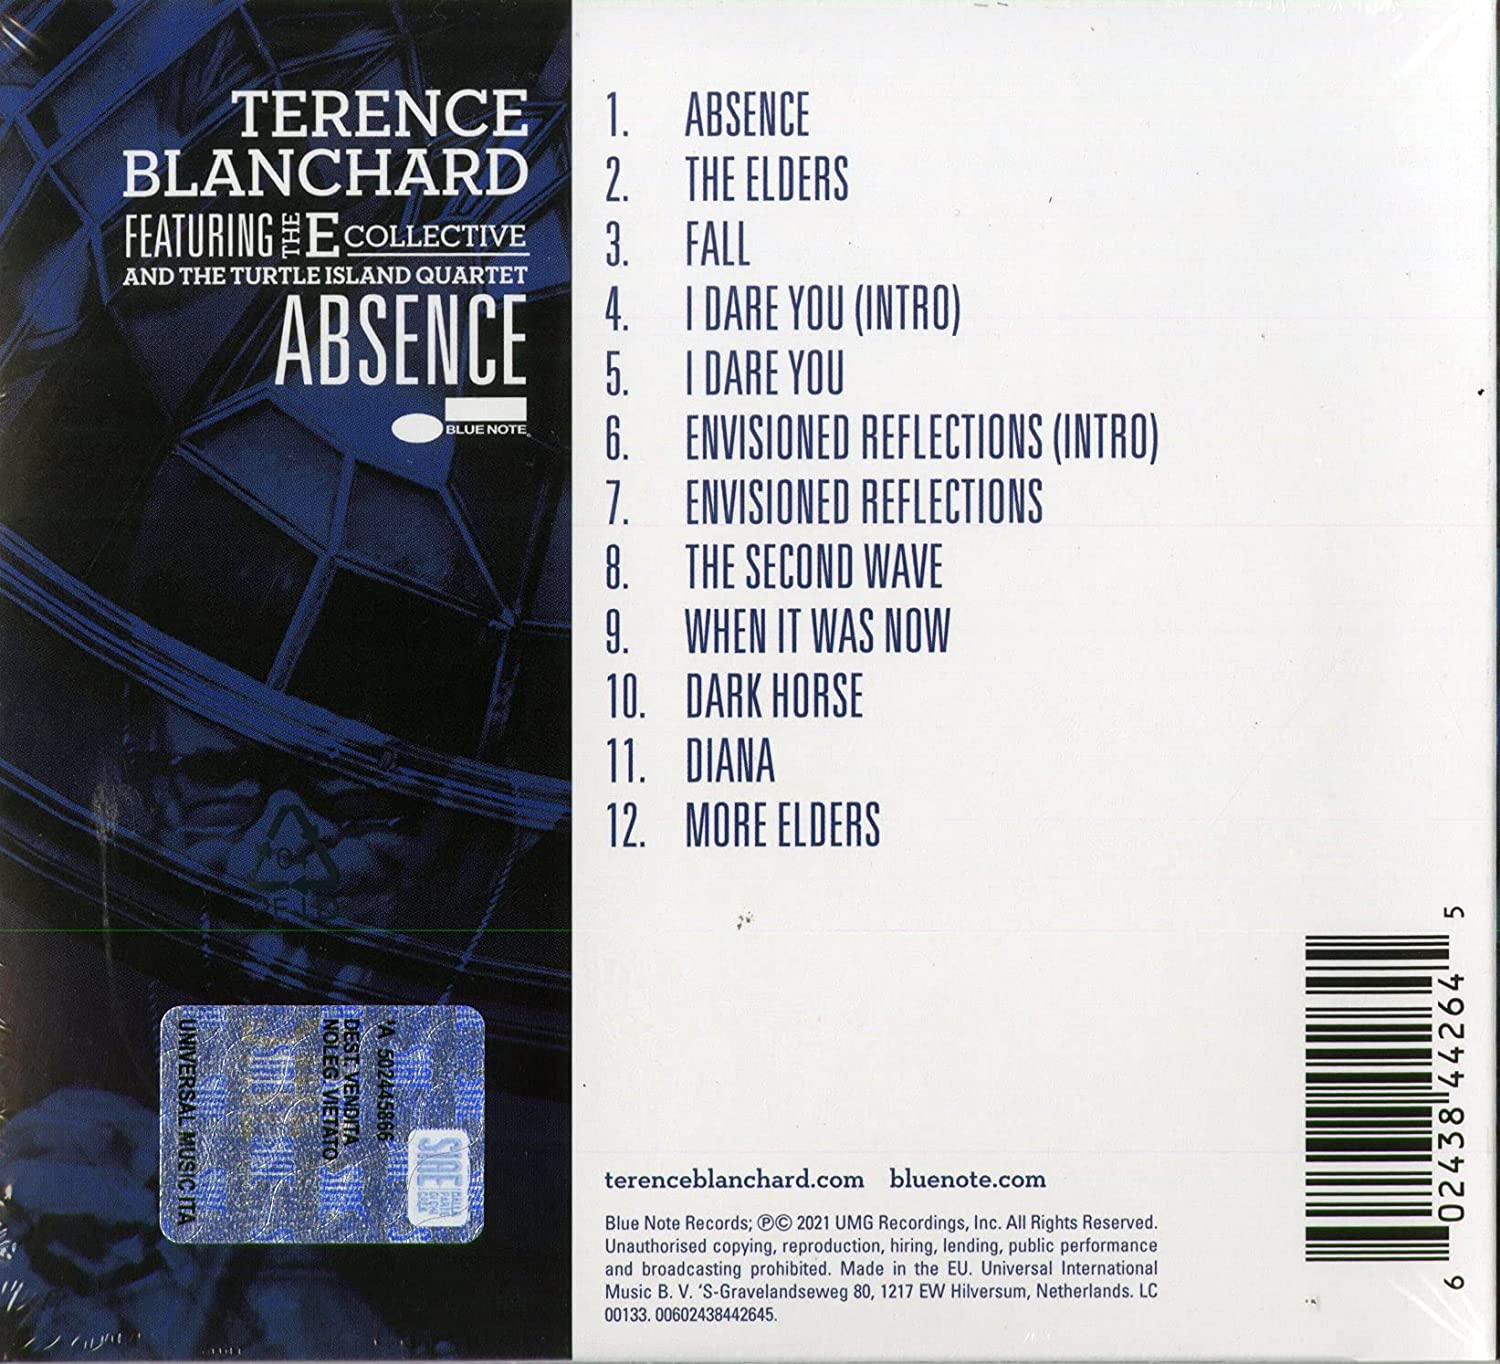 Terence Blanchard (테런스 블랜쳐드) - Absence 